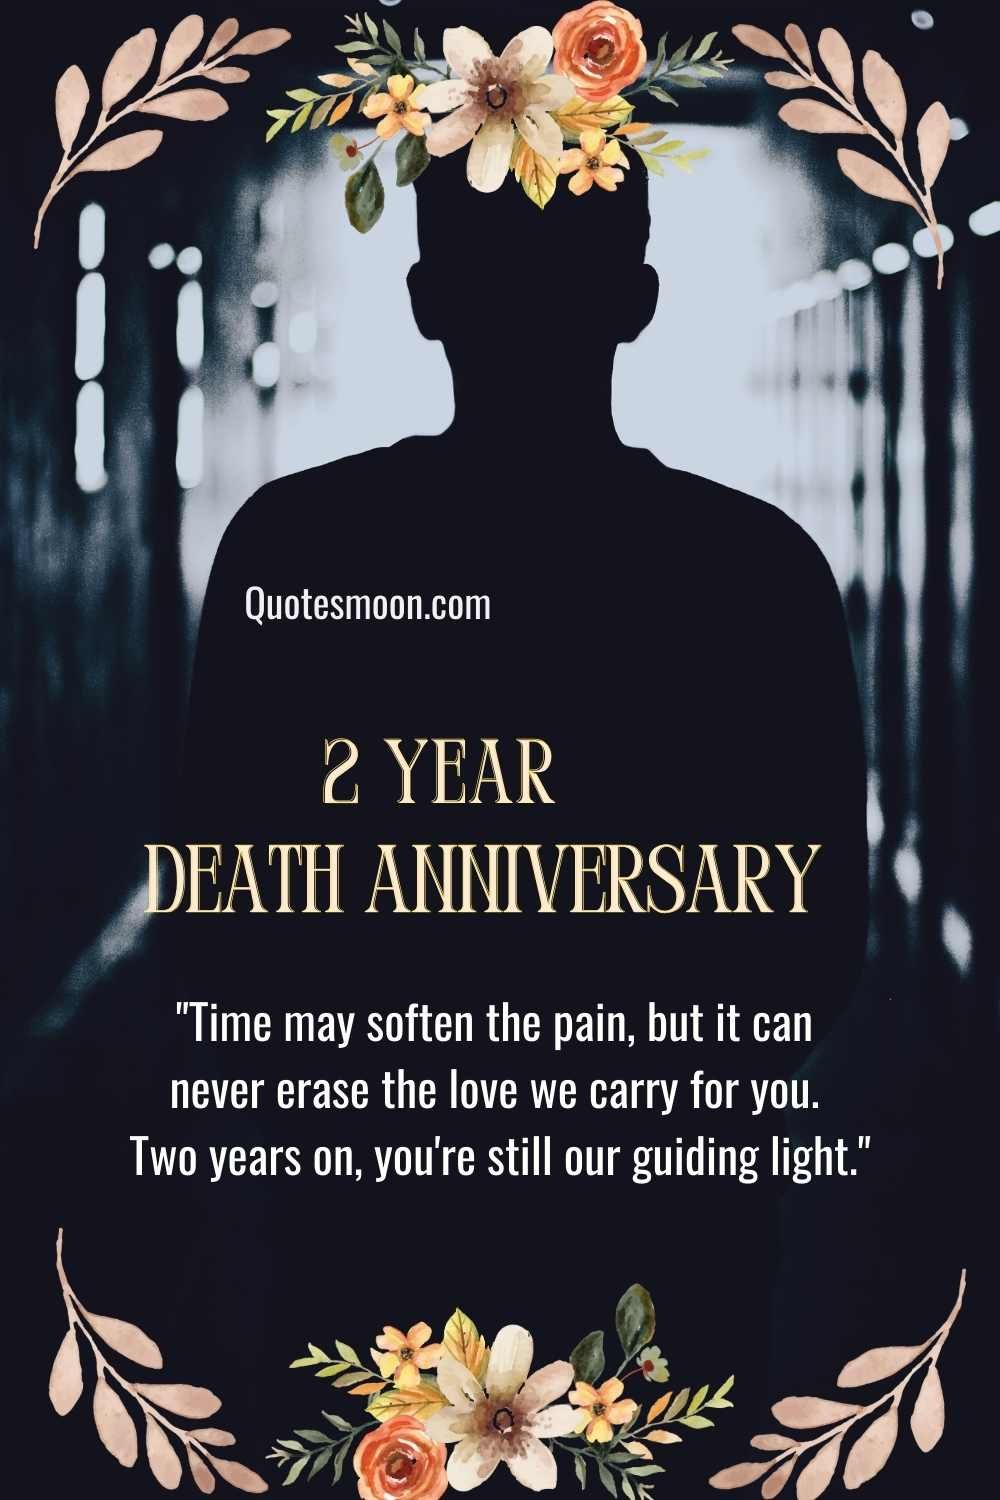 2 year death anniversary quotes